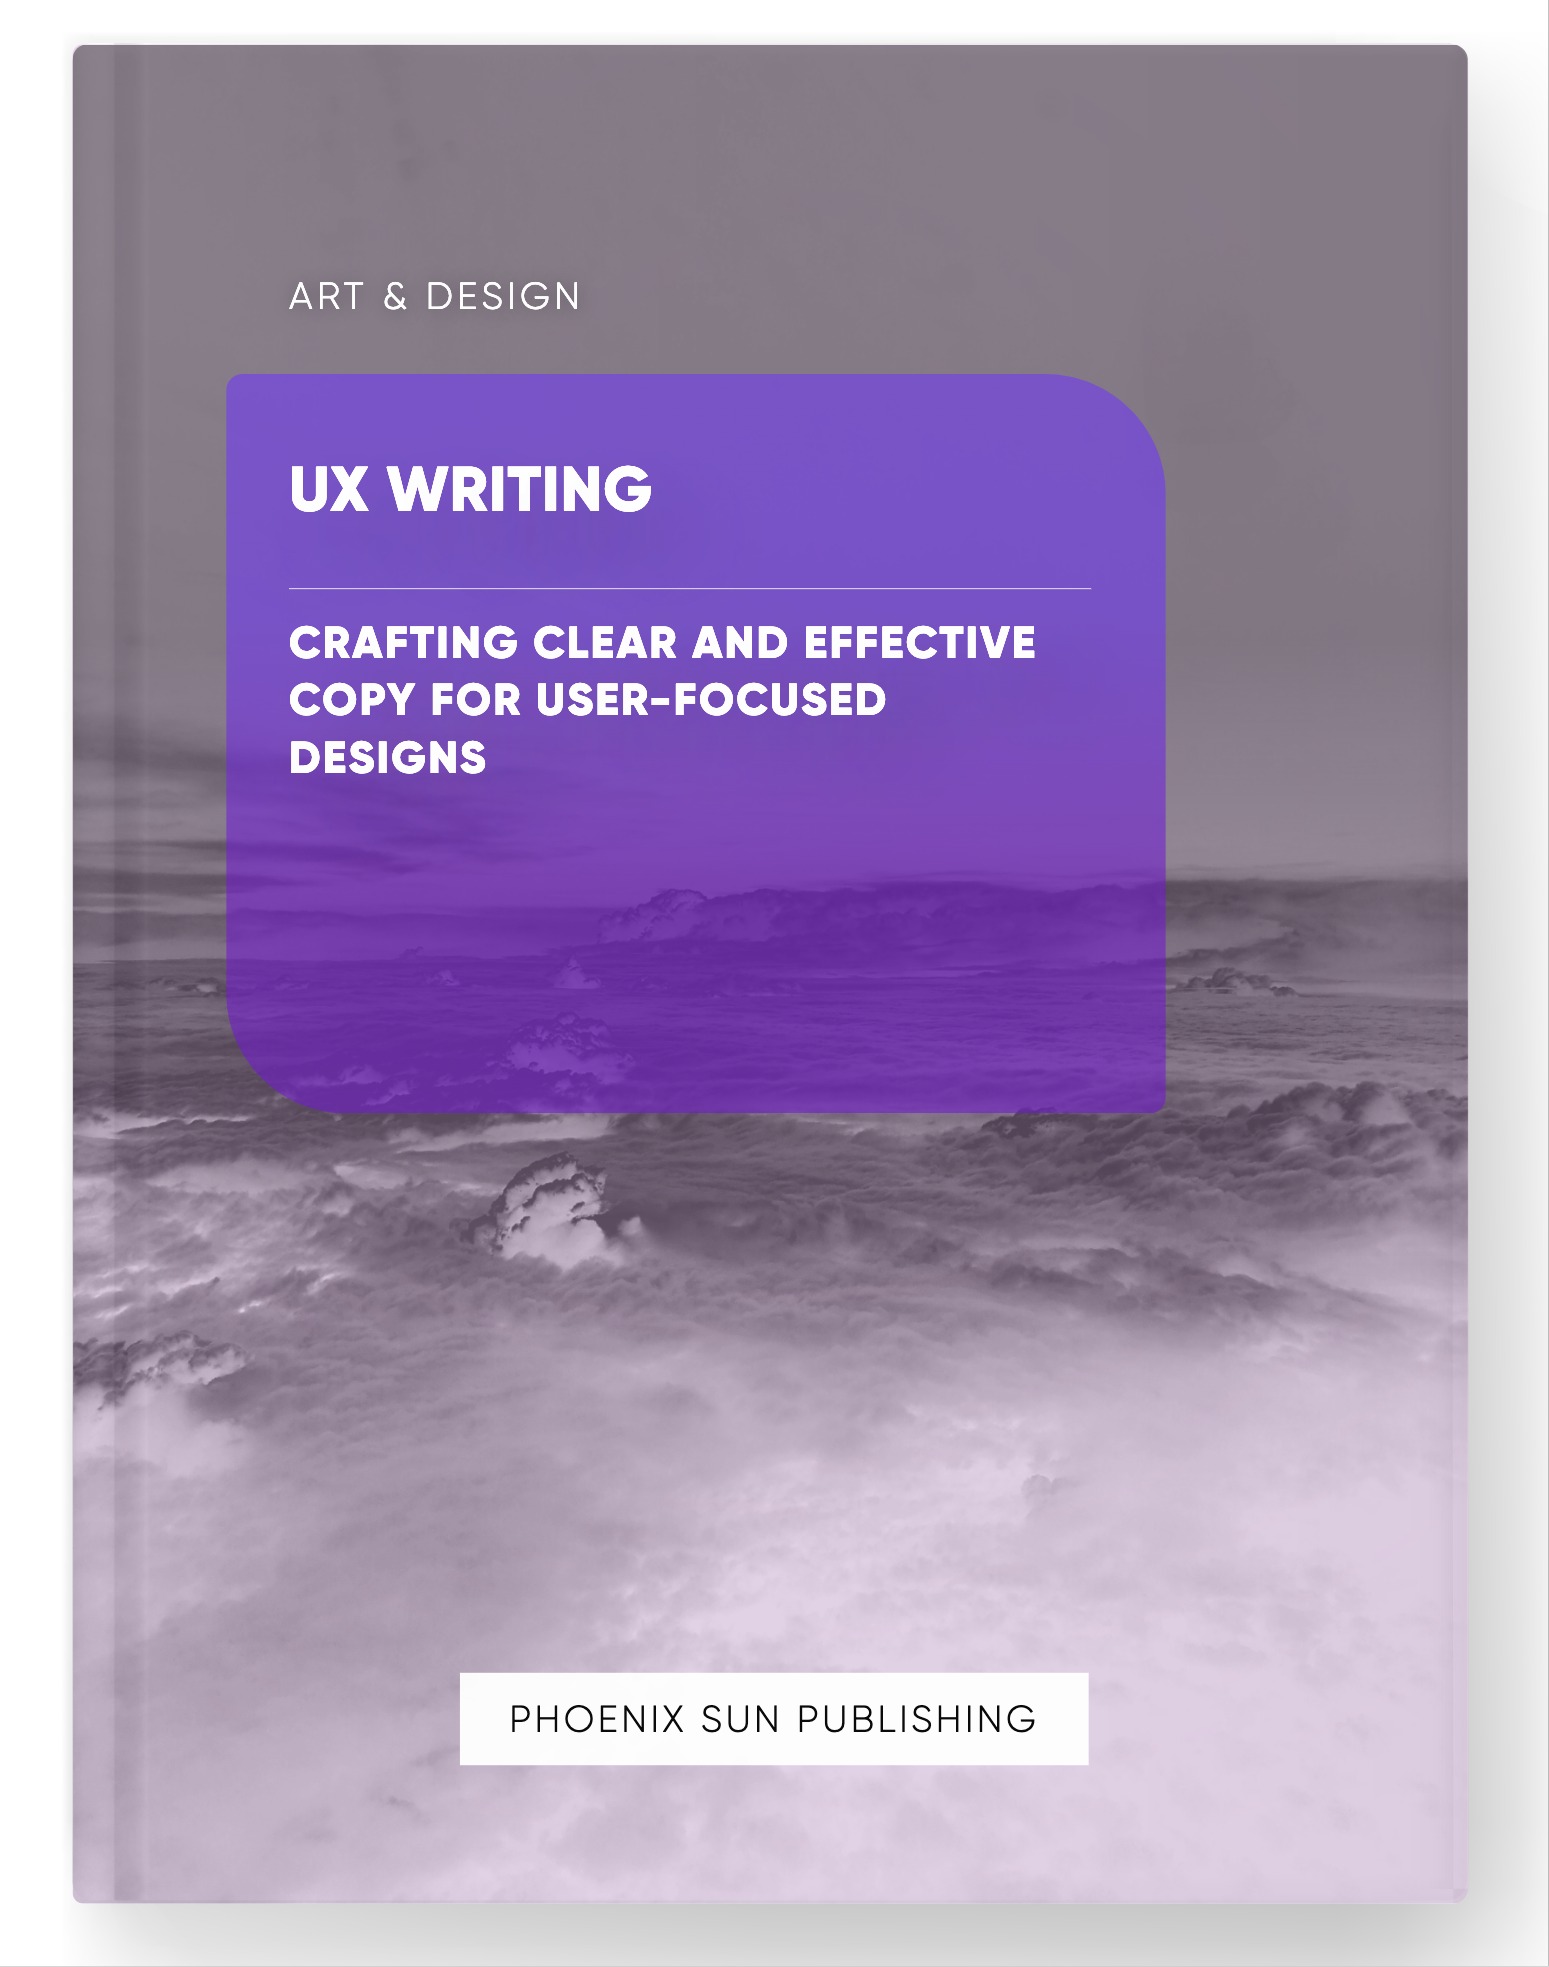 UX Writing – Crafting Clear and Effective Copy for User-Focused Designs